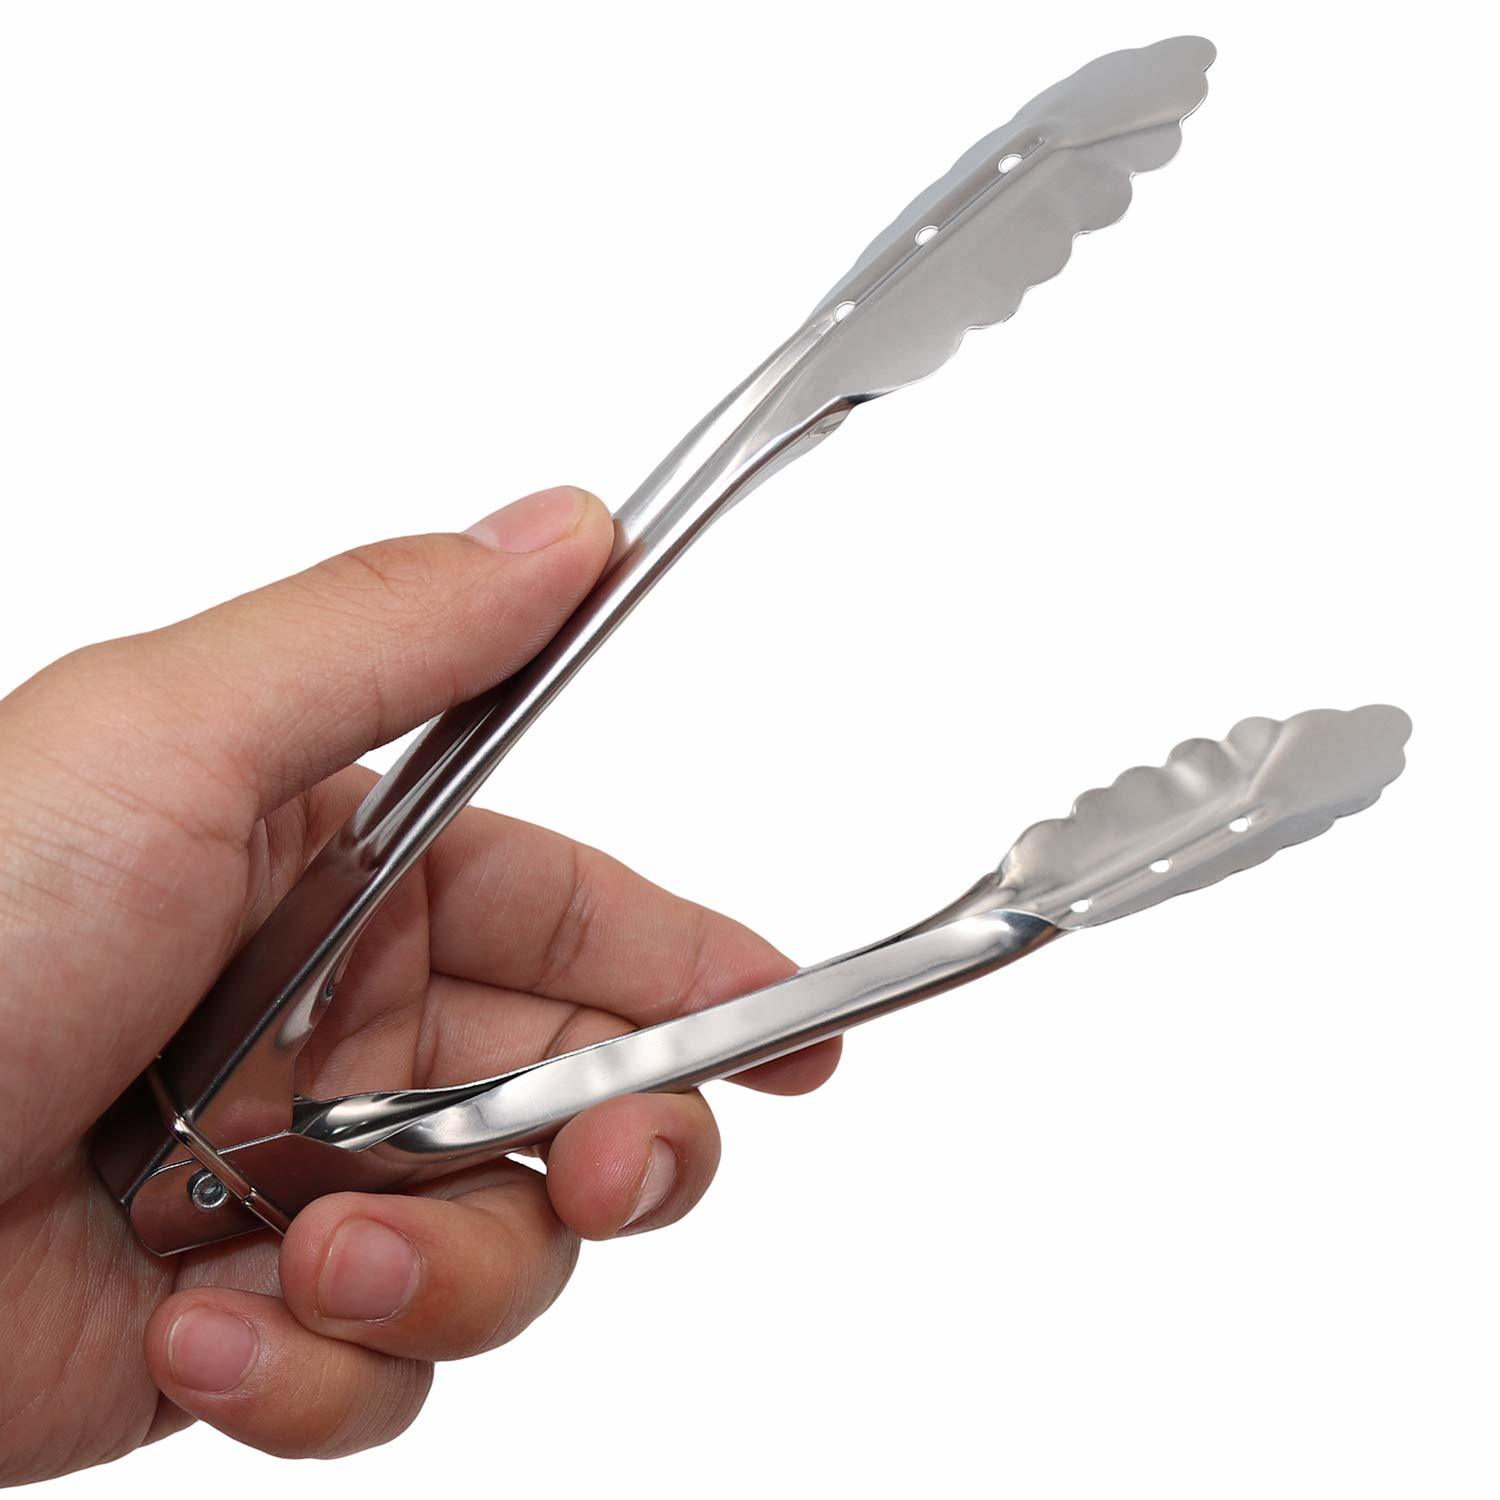 Small Stainless Steel Serving Tongs,QAAQS 7 Inch Non-Stick Mini Kitchen Small Stainless Steel Serving Tongs